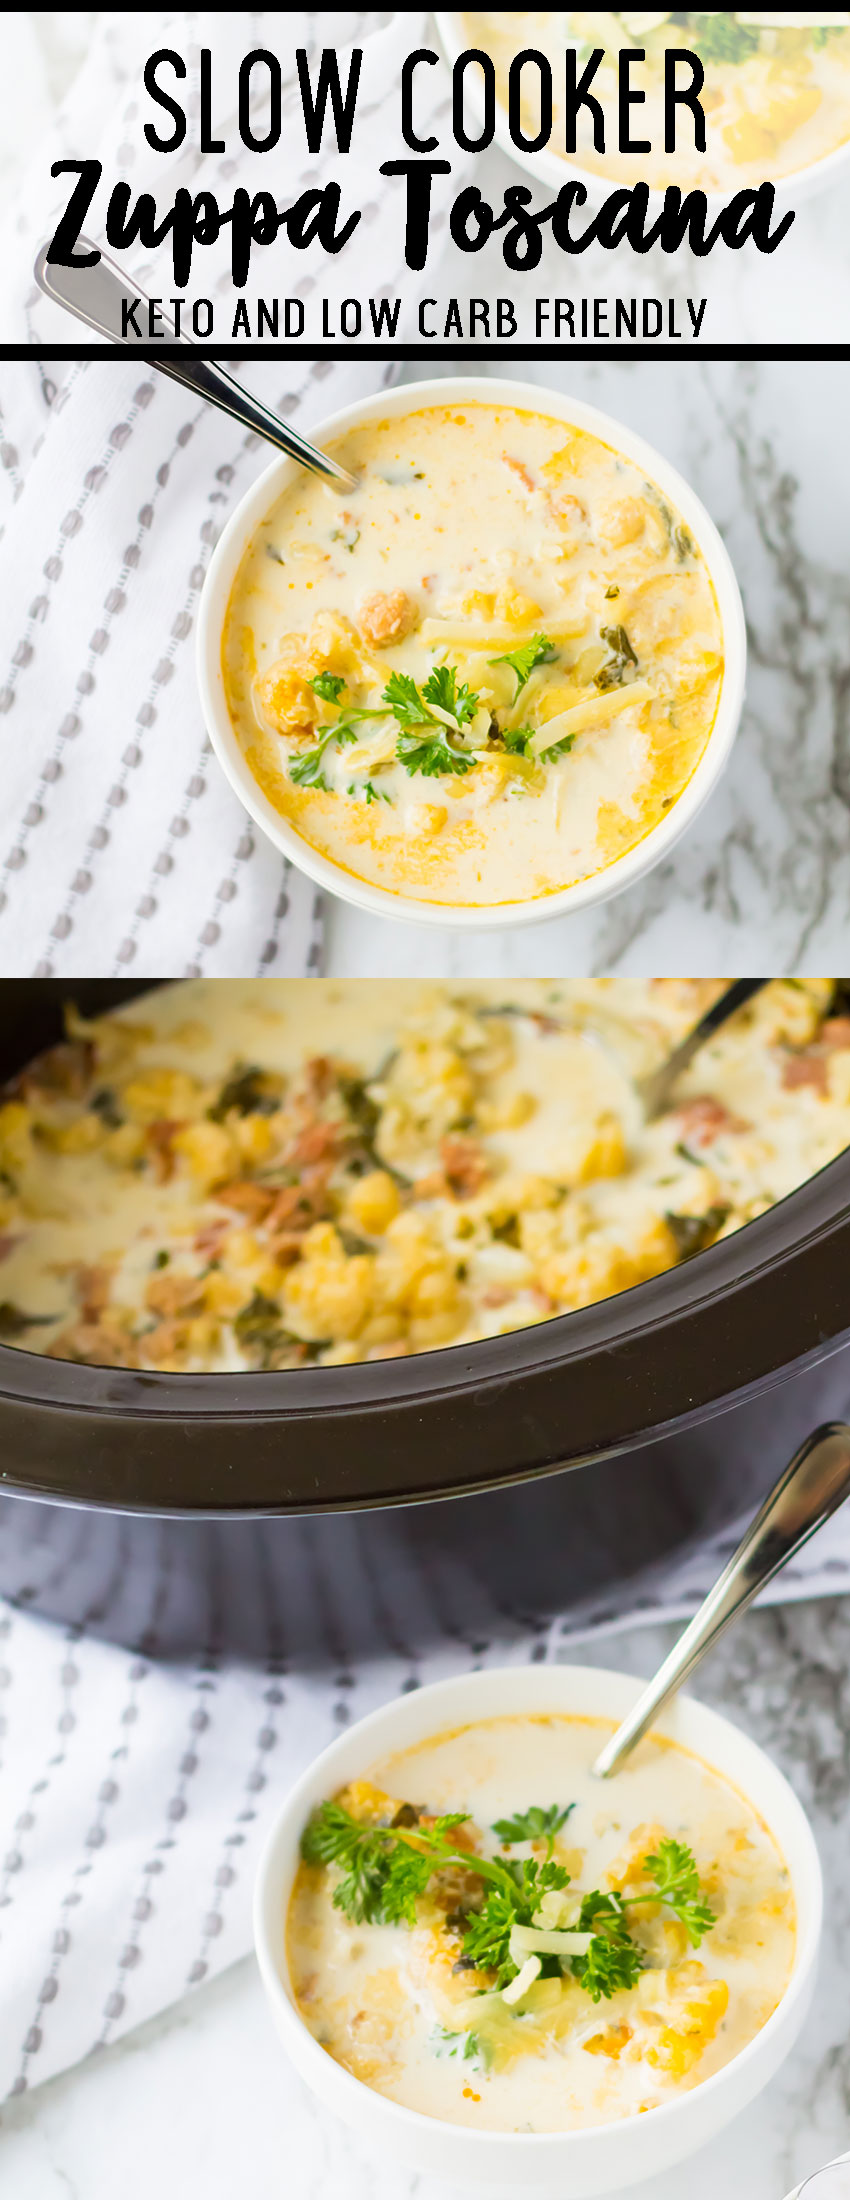 Slow Cooker Zuppa Toscana is a low carb soup